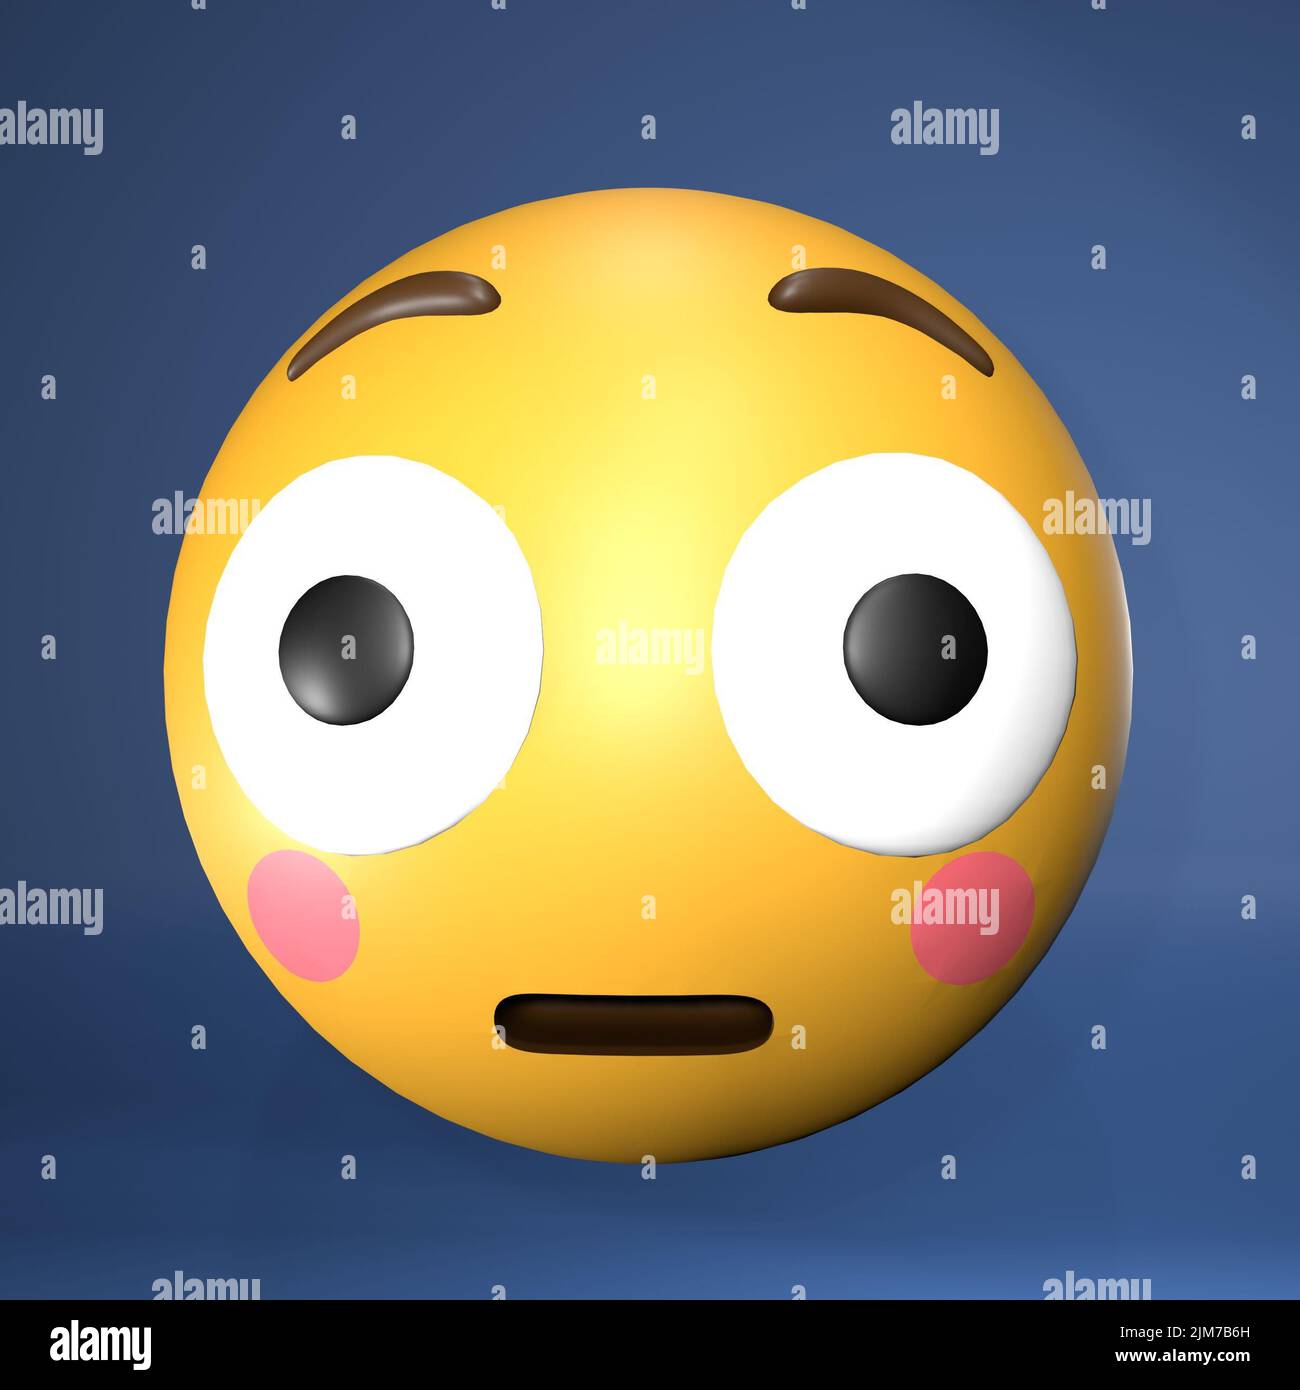 A 3D rendering of a yellow emoji with raised eyebrows, eyes staring ahead, and blushing cheeks Stock Photo